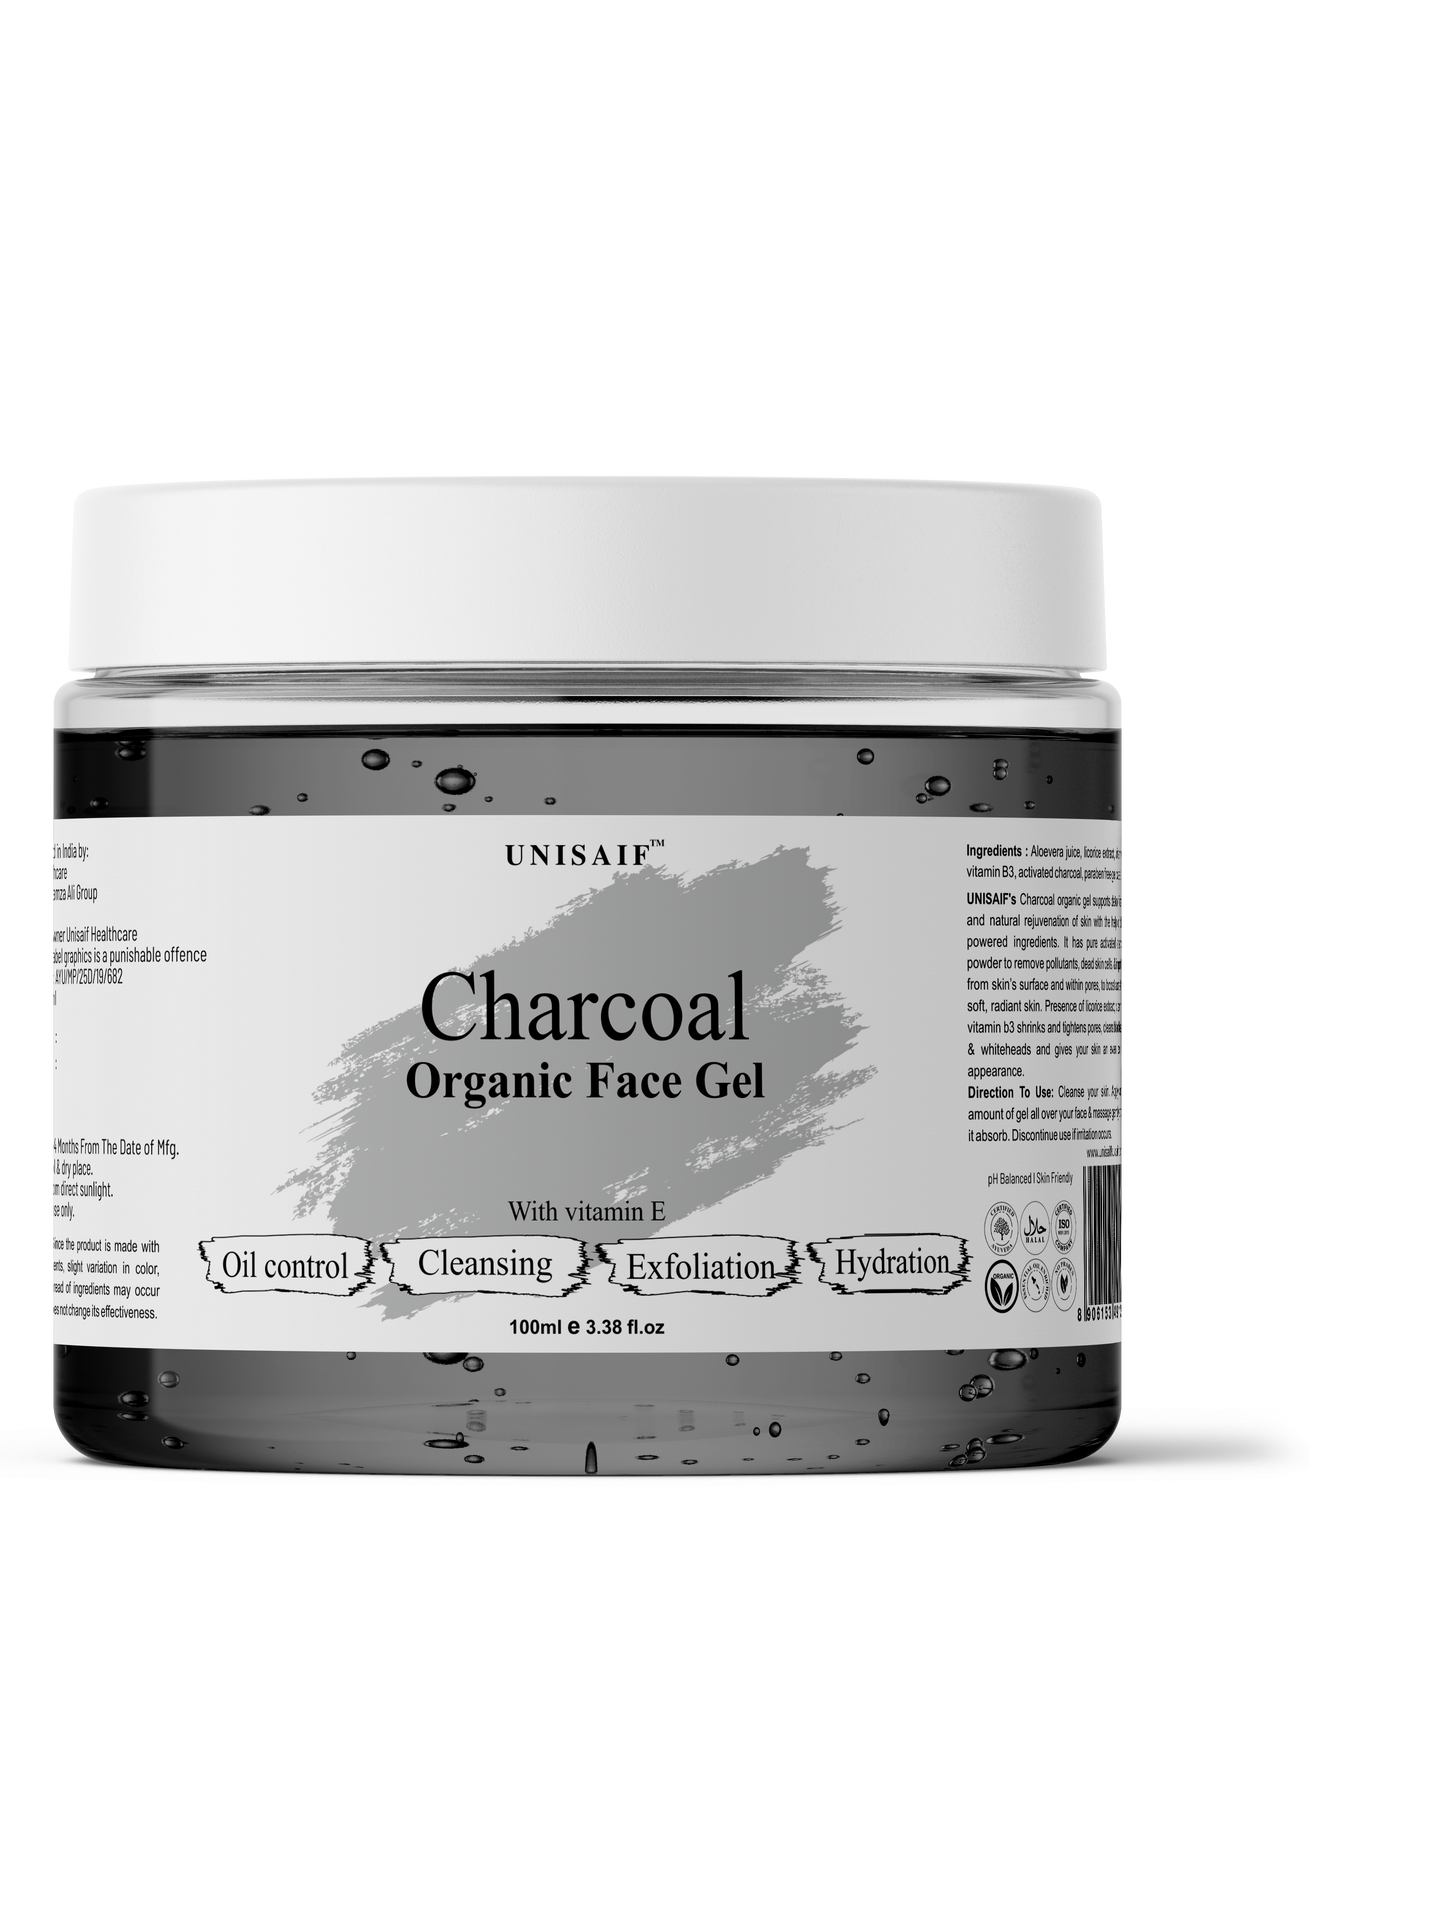 Charcoal Organic Facial Gel (100 ml) | Oil Control| Cleansing| Exfoliation| Hydration| NO PARABEN